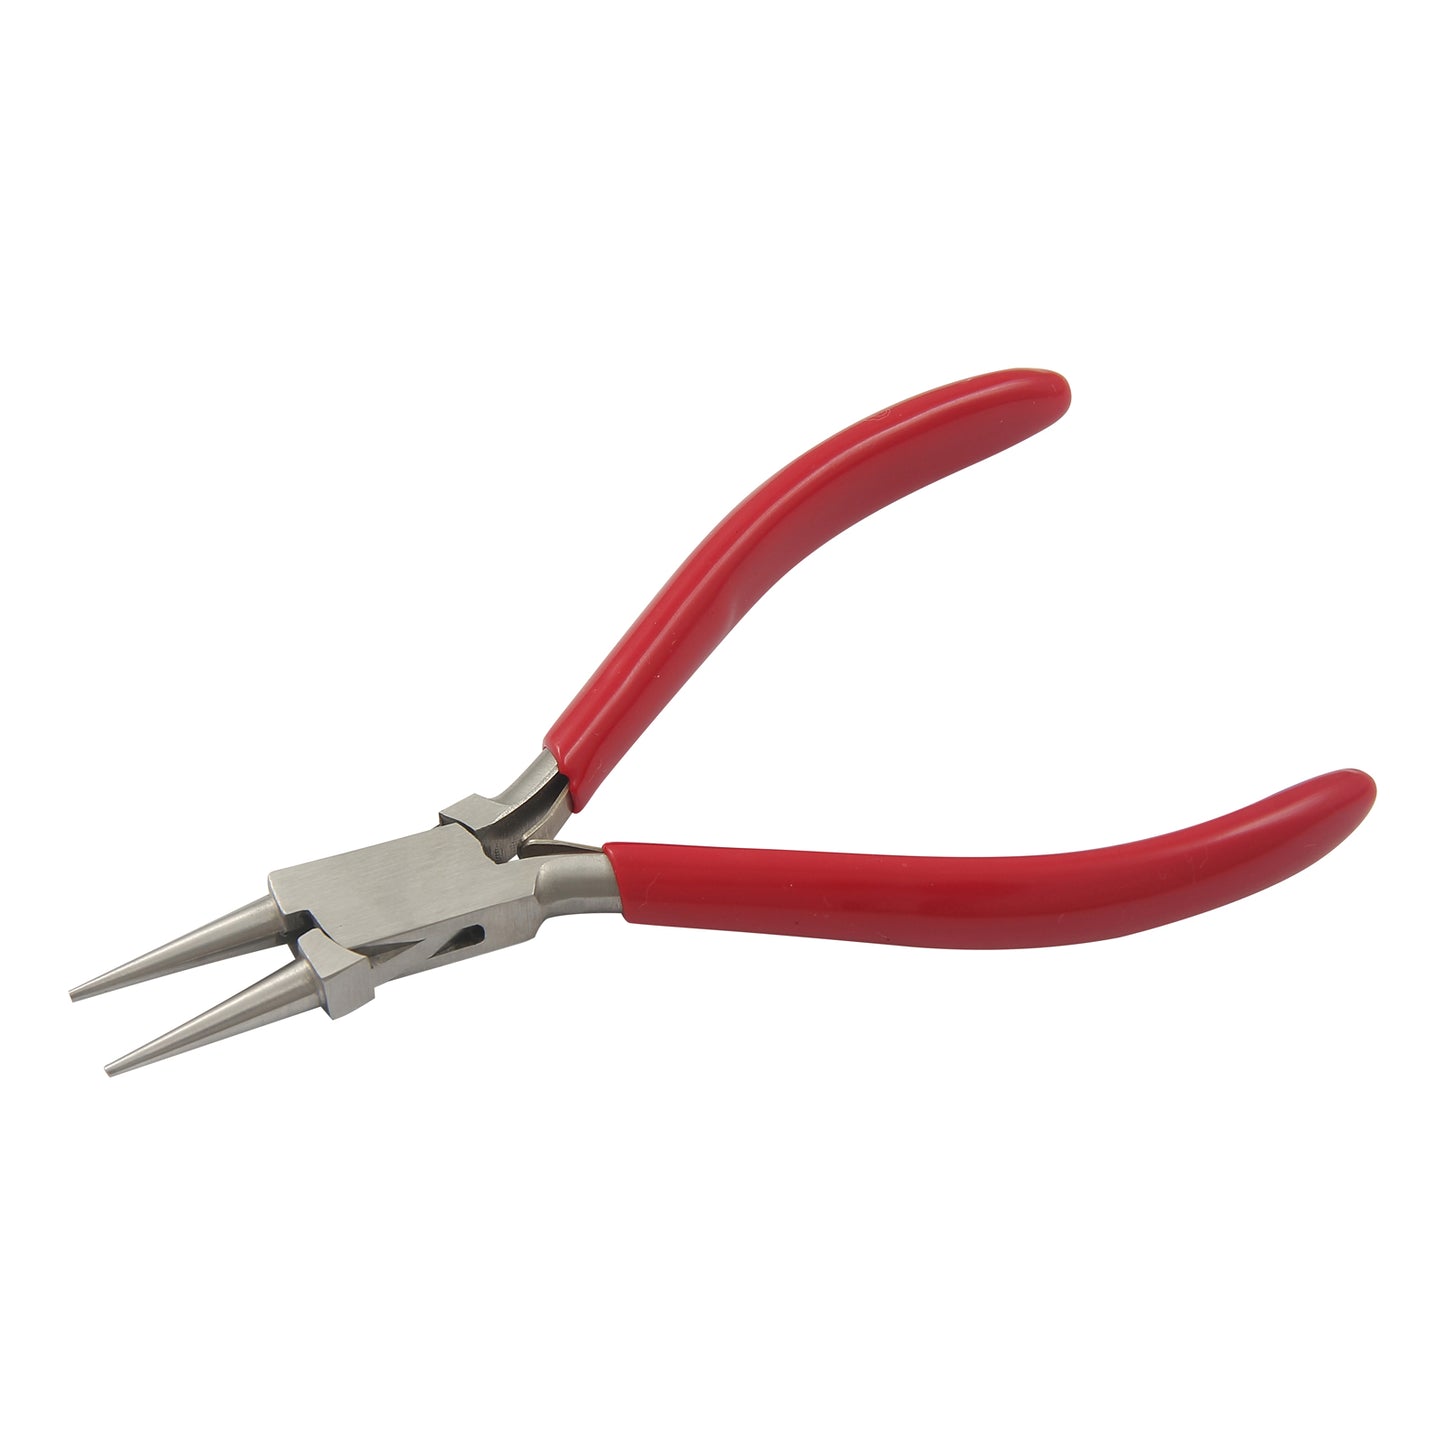 Round Nose Plier, Size 130mm, smooth jaws, with double leaf spring & PVC handles